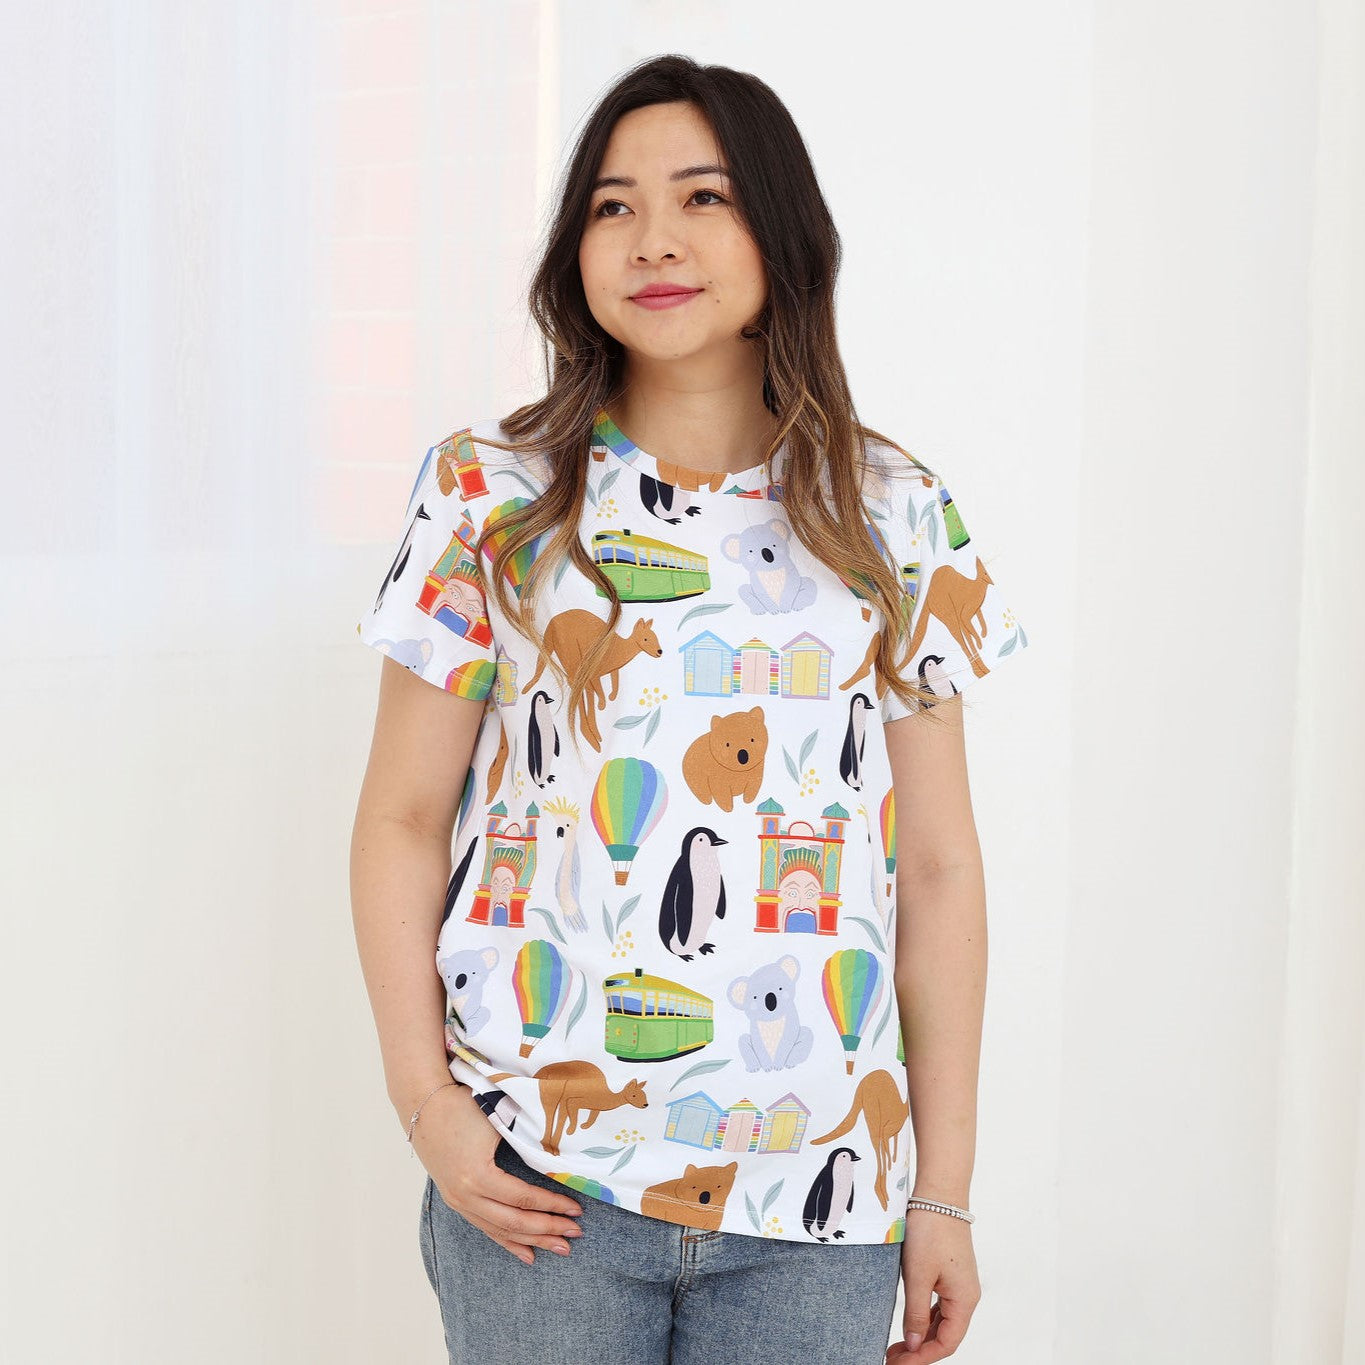 pebble-and-poppet-melbourne-Christie-Williams-womens-adult-tshirt